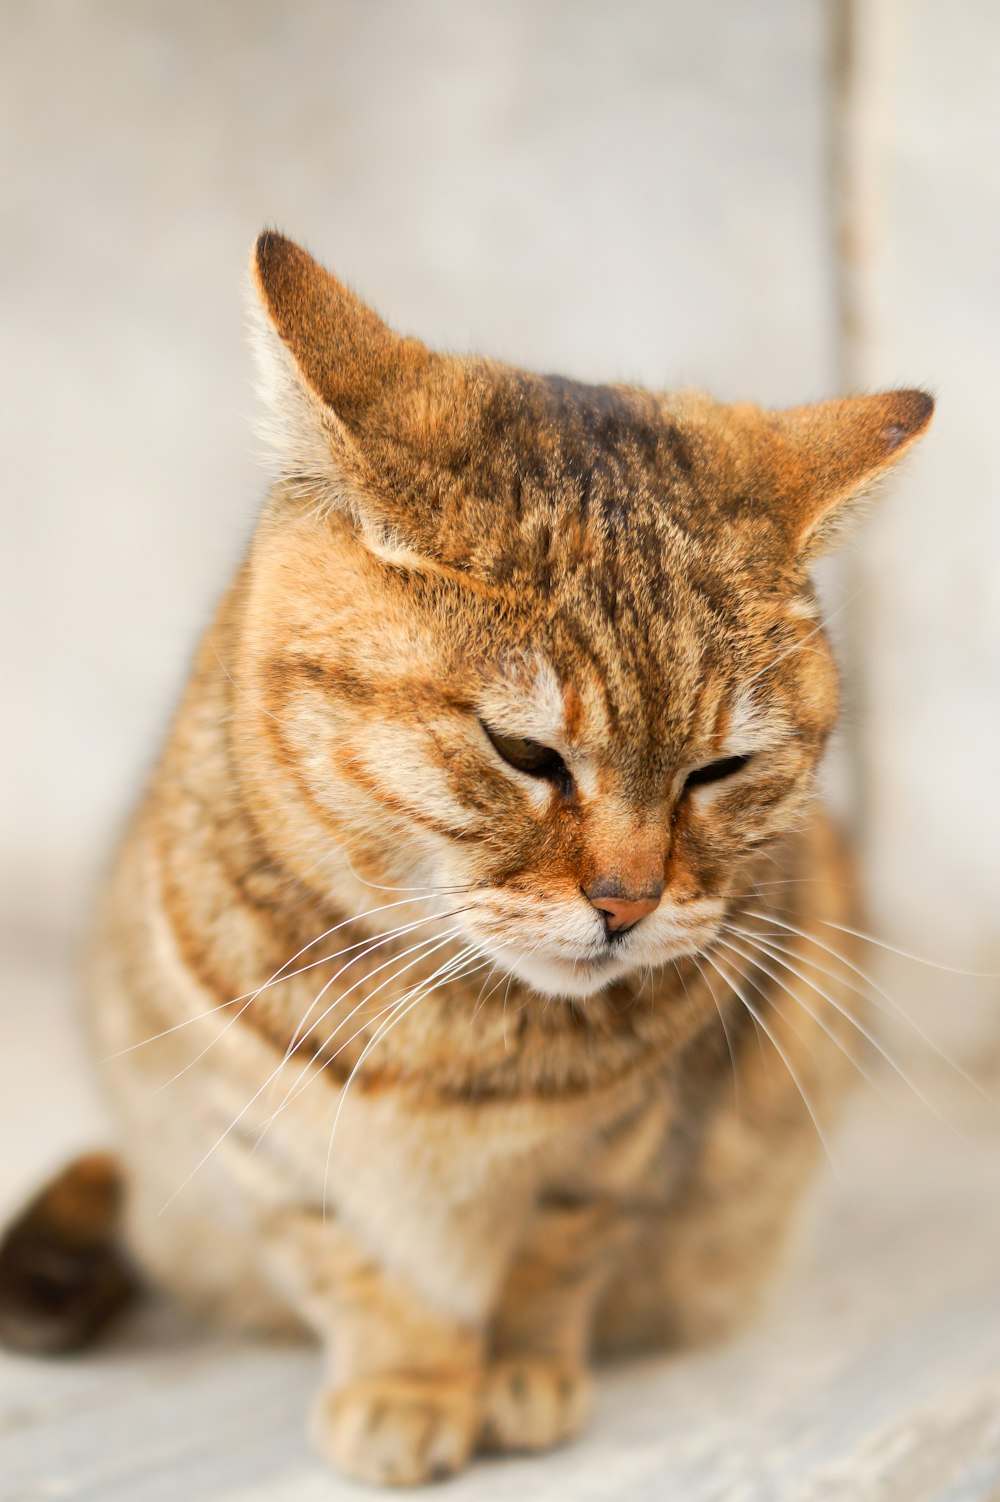 selective focus photo of brown tabby cat